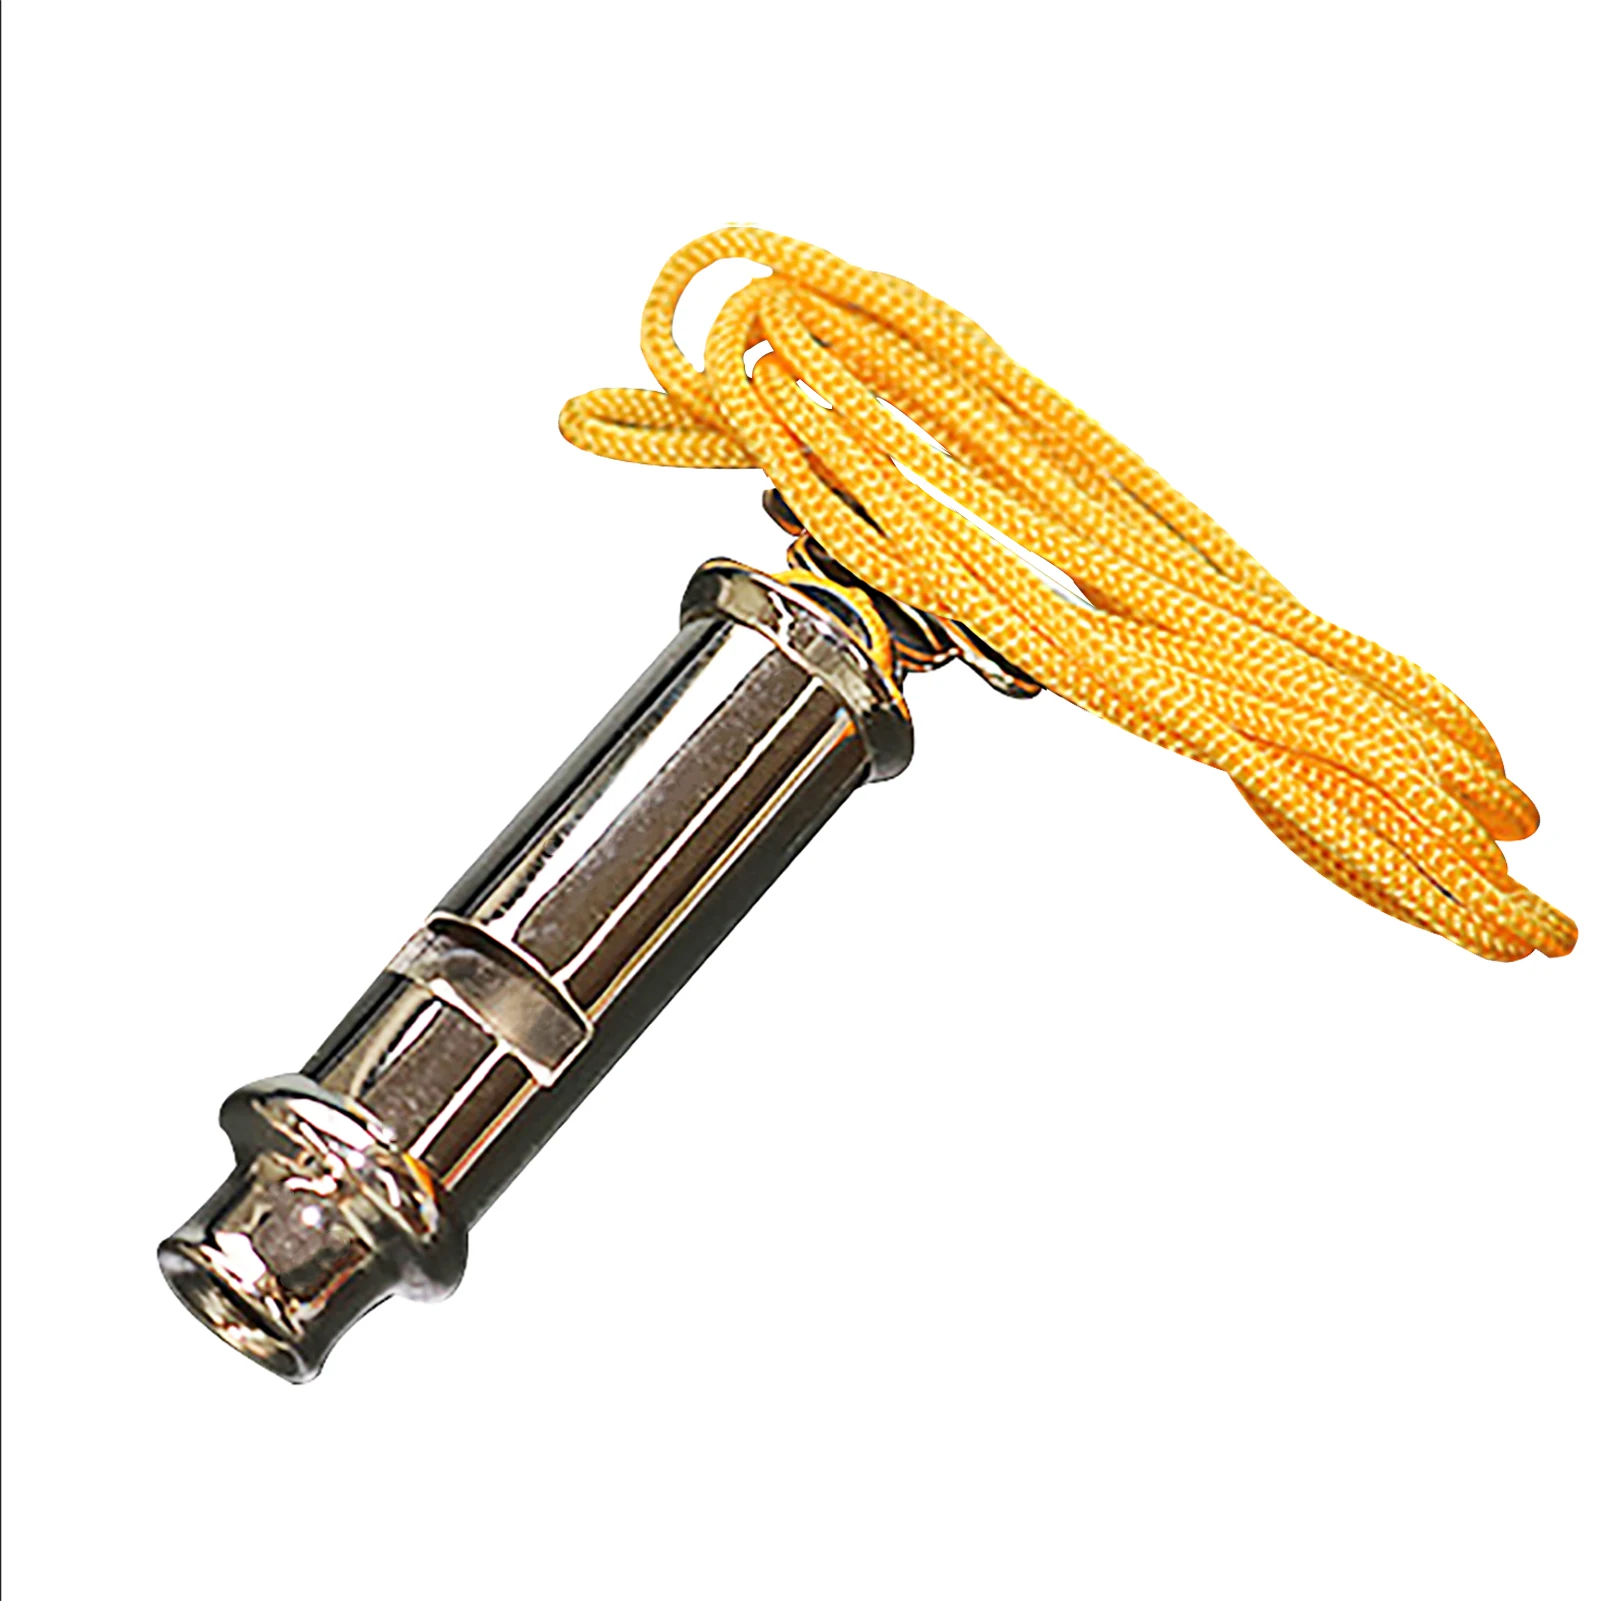 

Outdoor Survival Sports Trainning Metal Coach Referee Whistle With Neck Chain Lanyard Emergency Security School Match Whistle